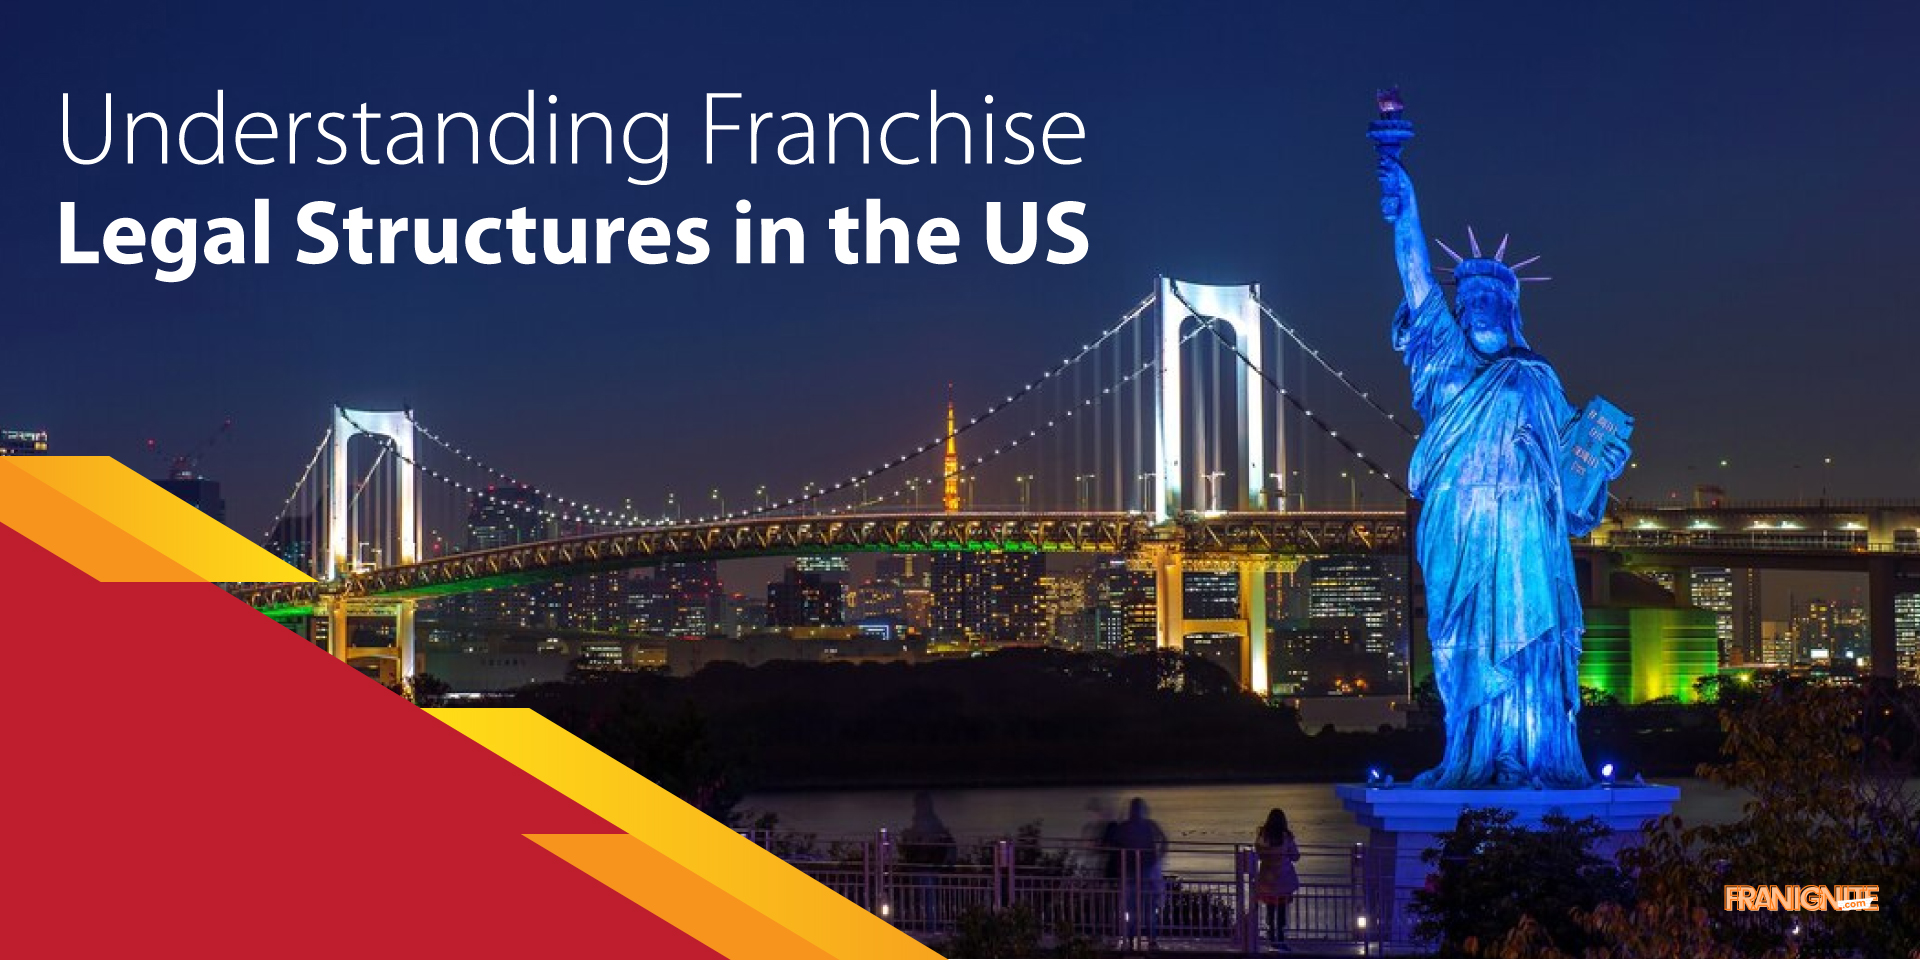 Understanding Franchise Legal Structures in the US